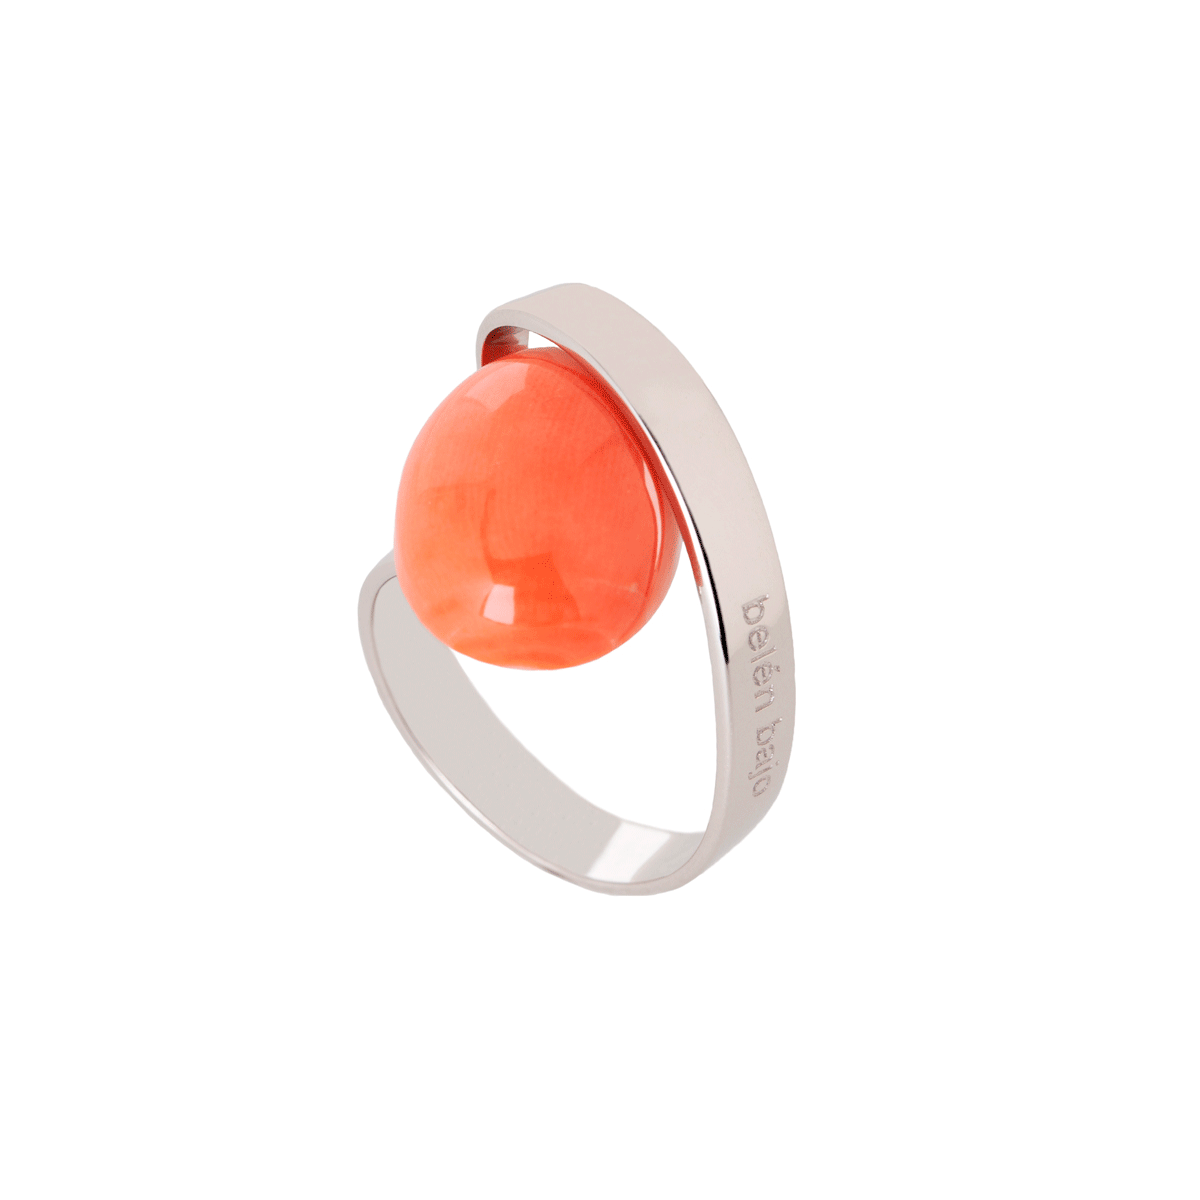 Wei handcrafted ring in sterling silver and coral designed by Belen Bajo